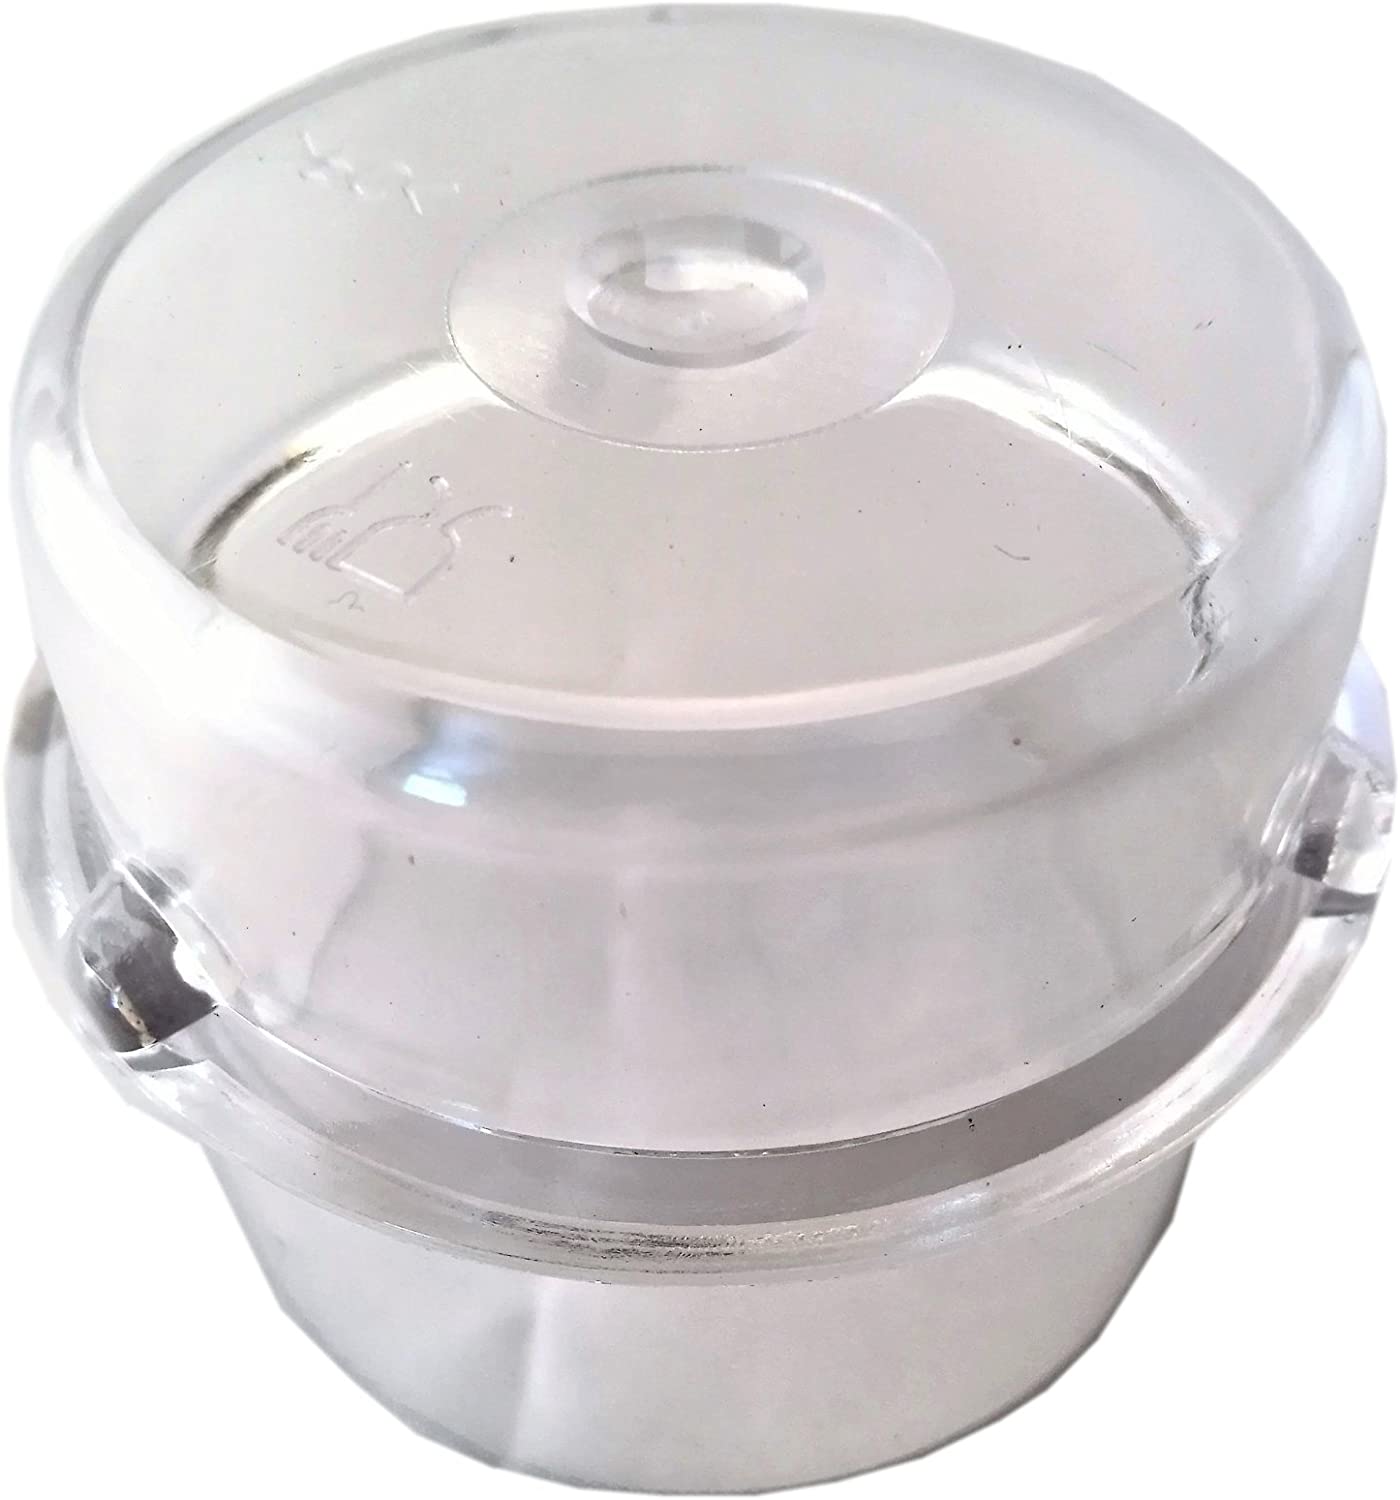 Daniplus Measuring Cup 100 ml for Lid Opening Suitable for Thermomix TM21, TM31, TM3300